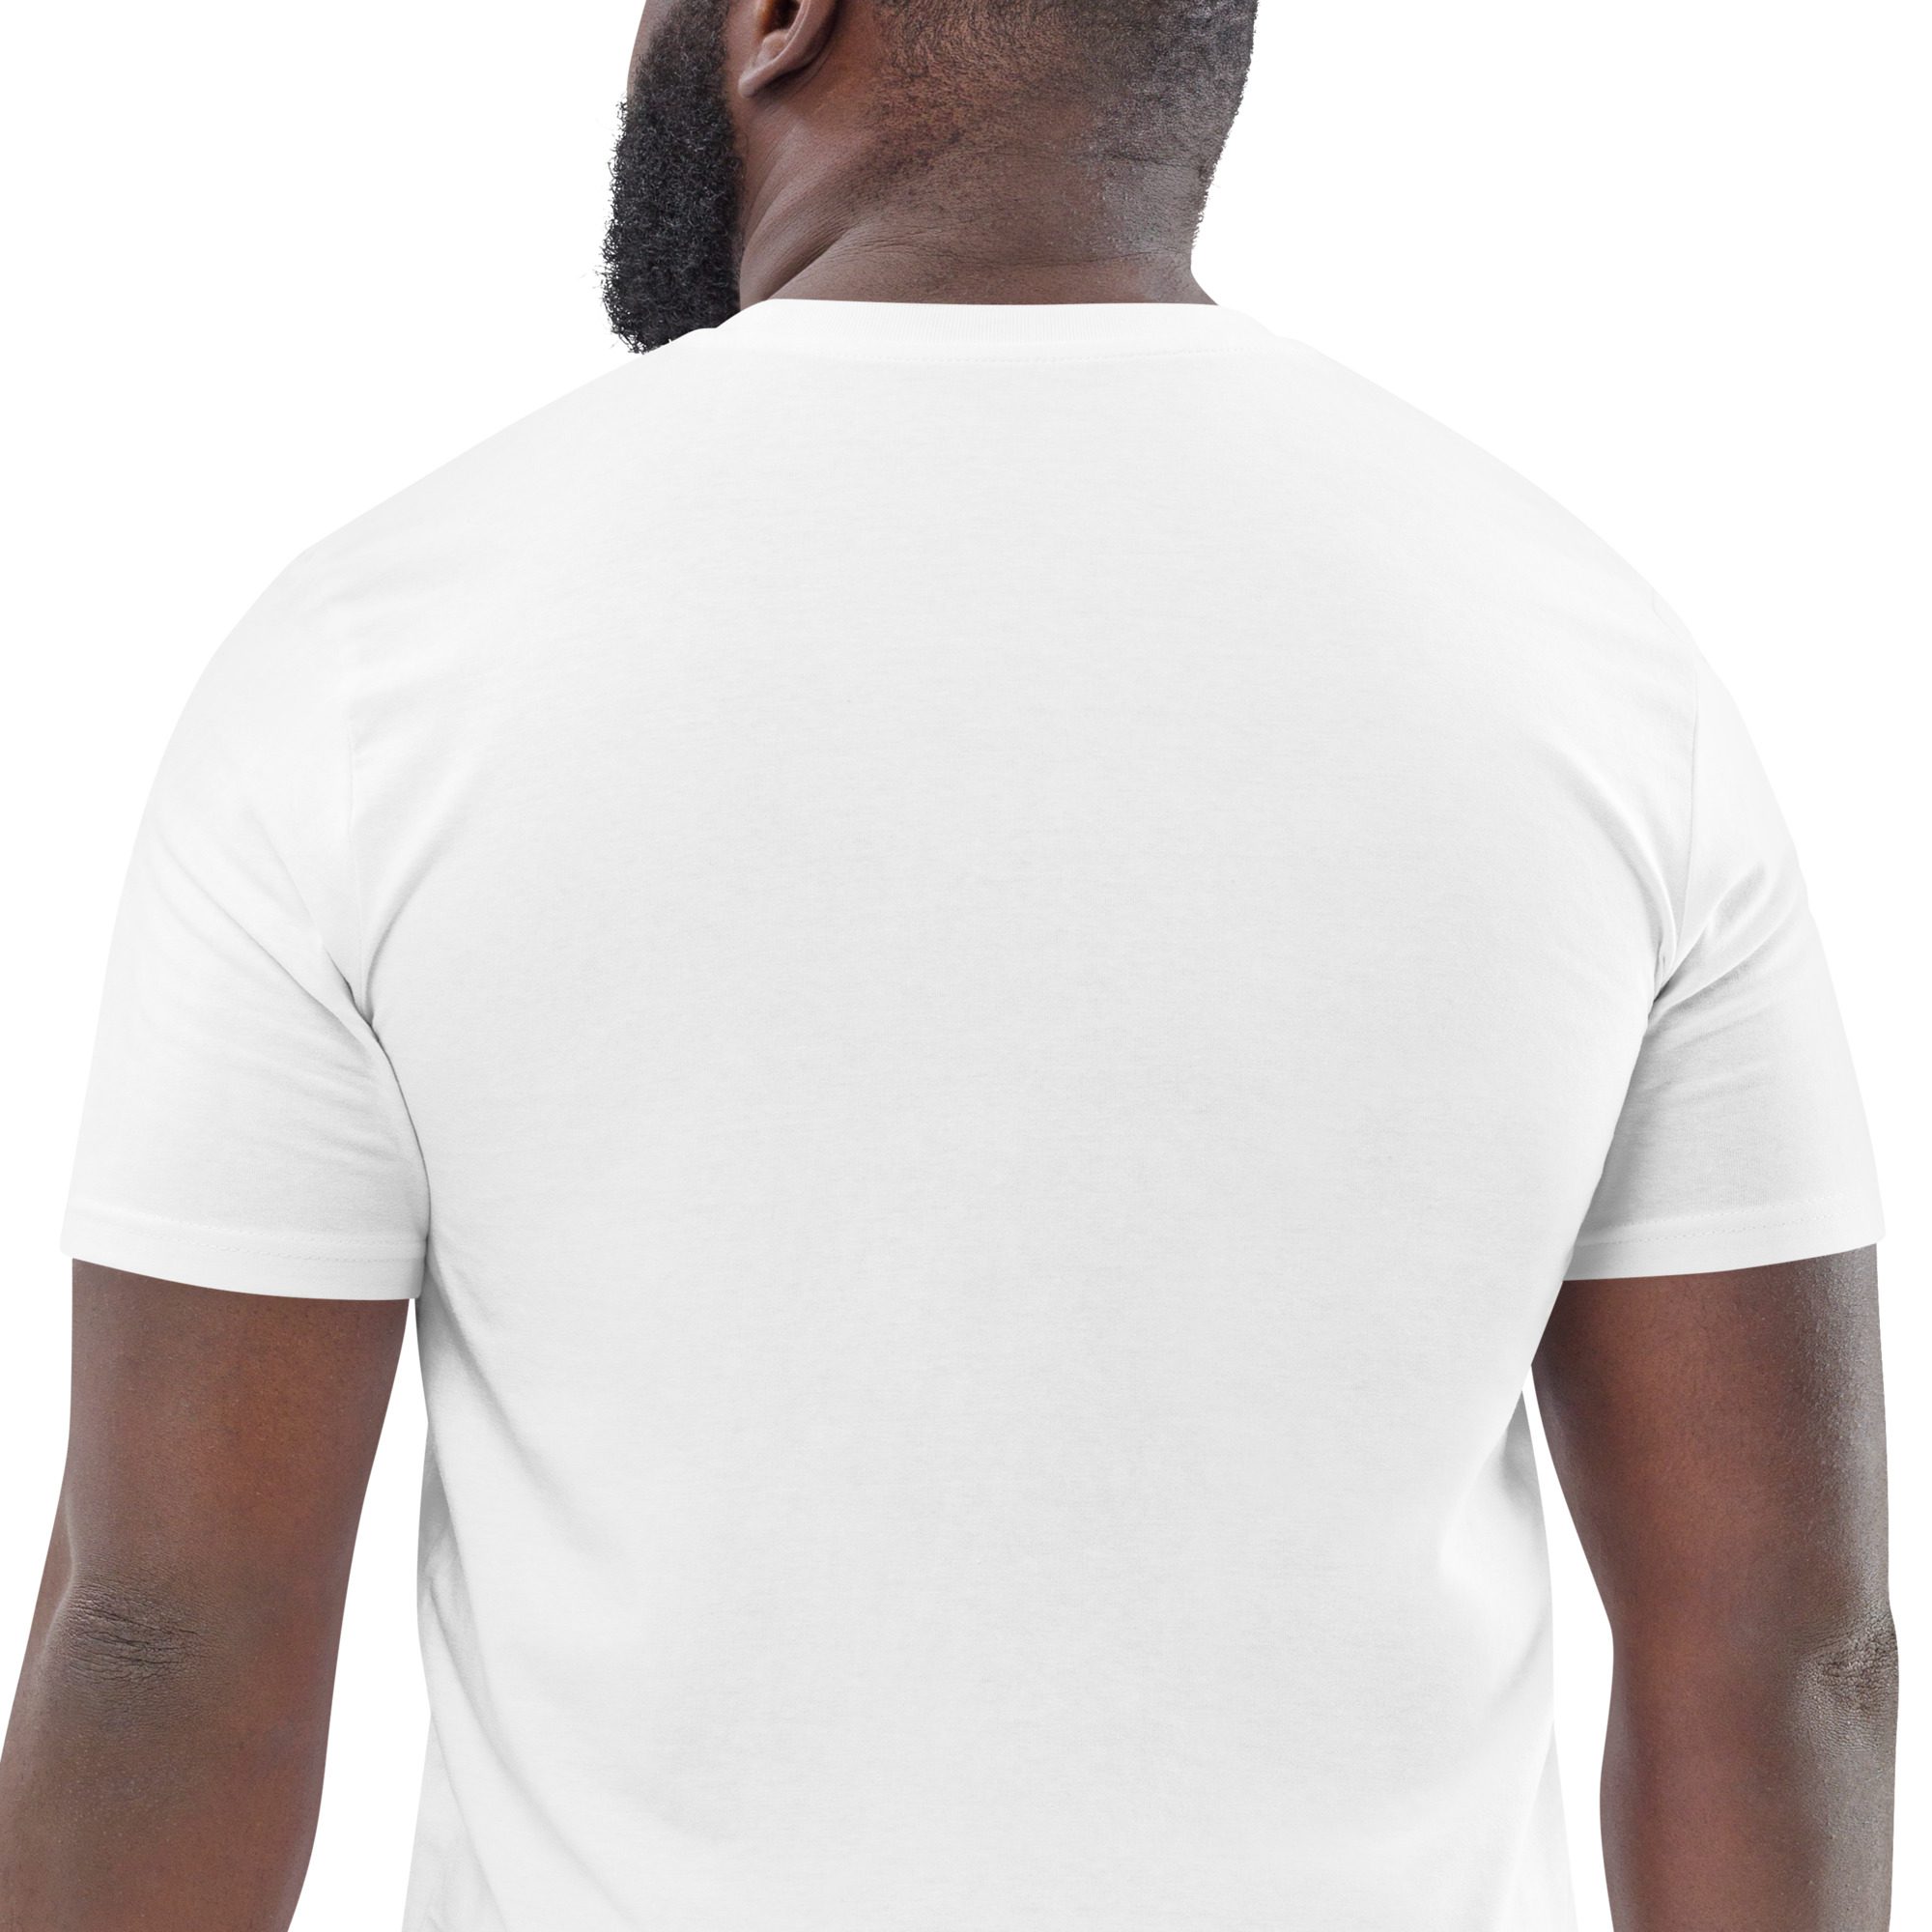 unisex organic cotton t shirt white zoomed in 651ada93baed1